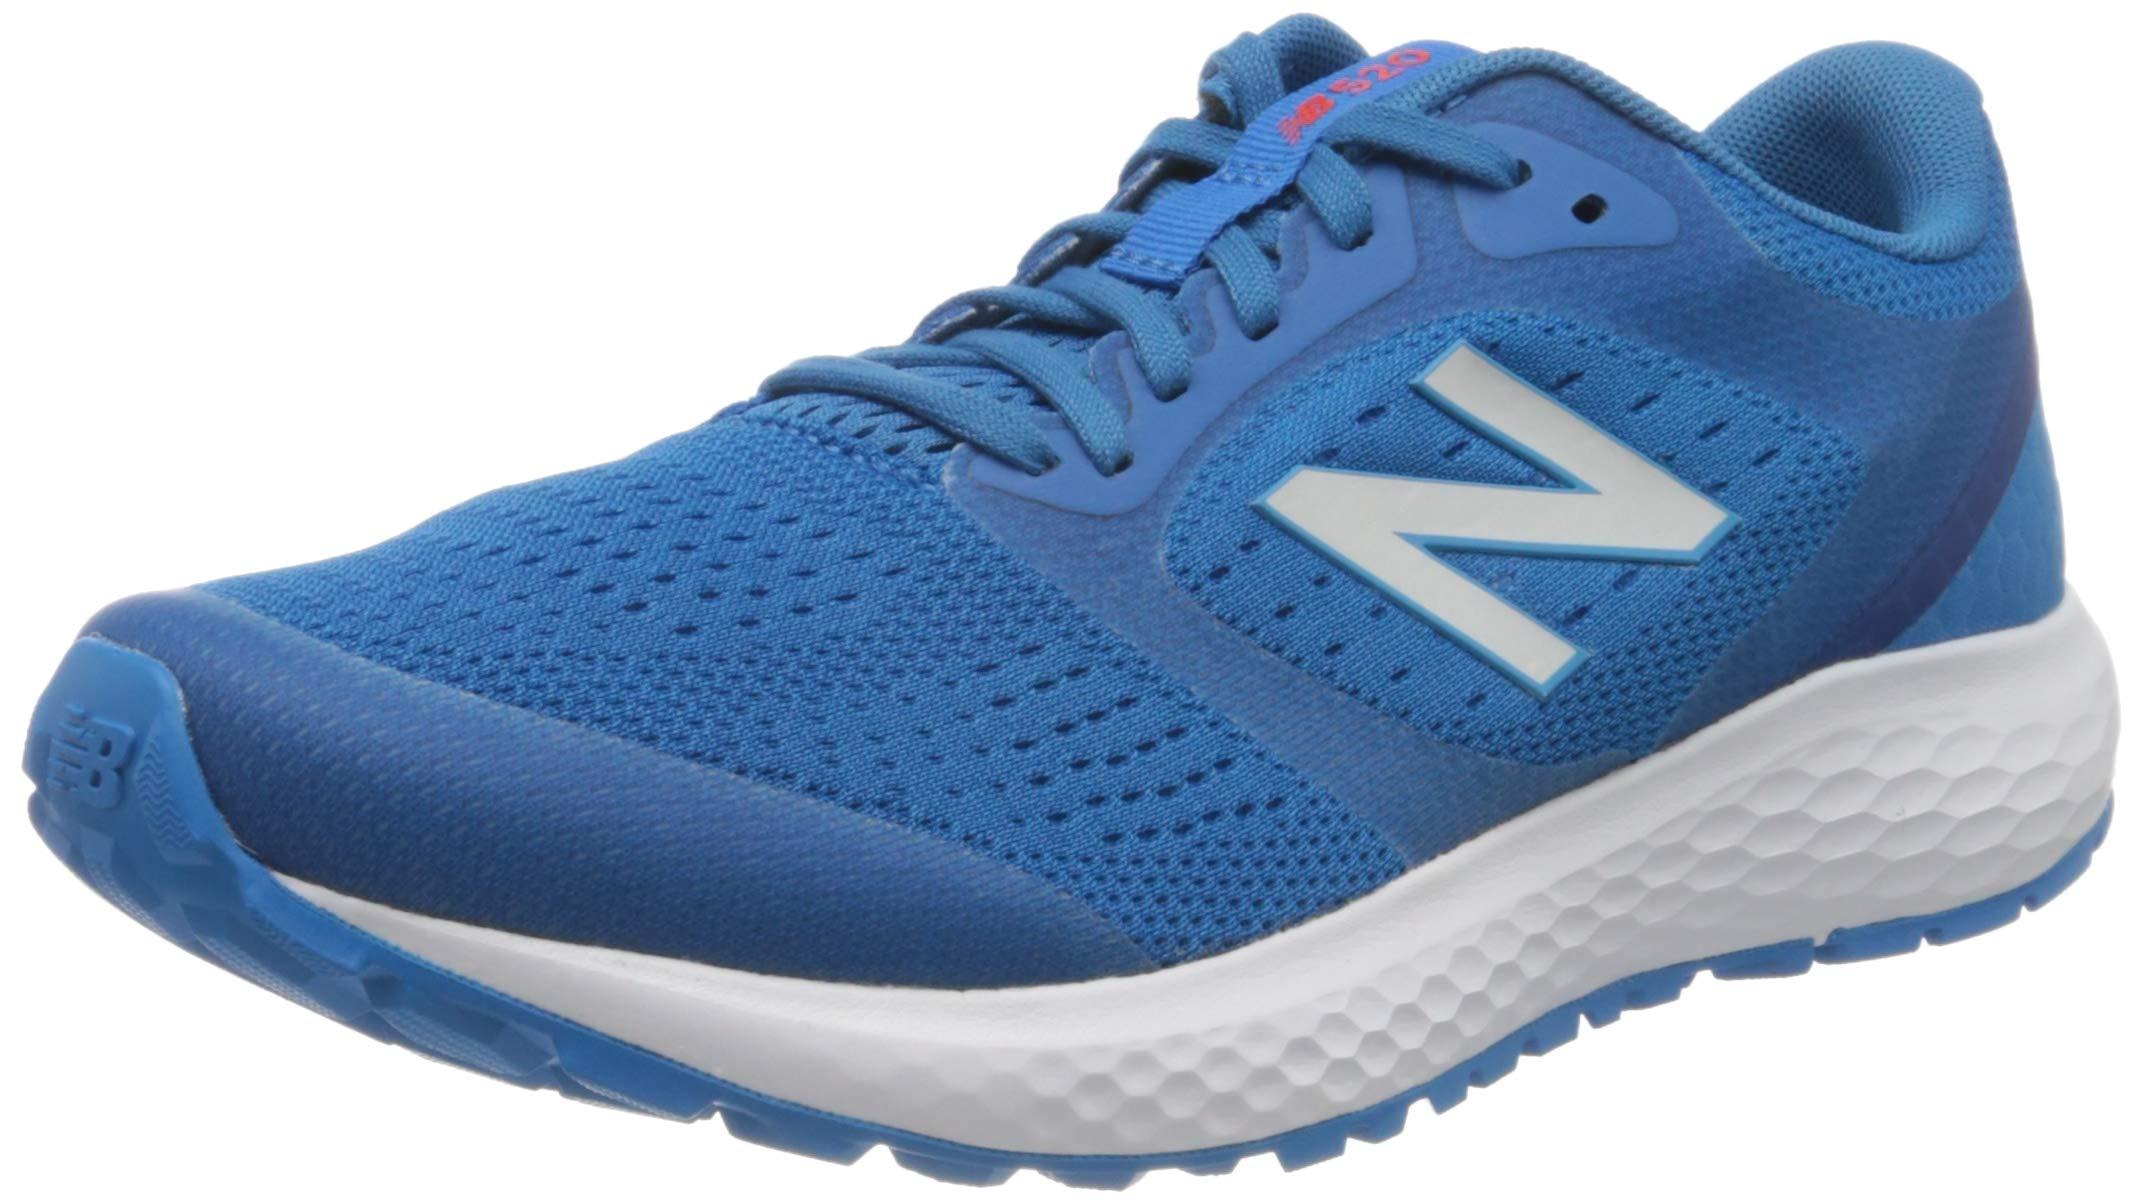 New Balance 520v6 Running Shoes in Blue for Men - Save 42% - Lyst